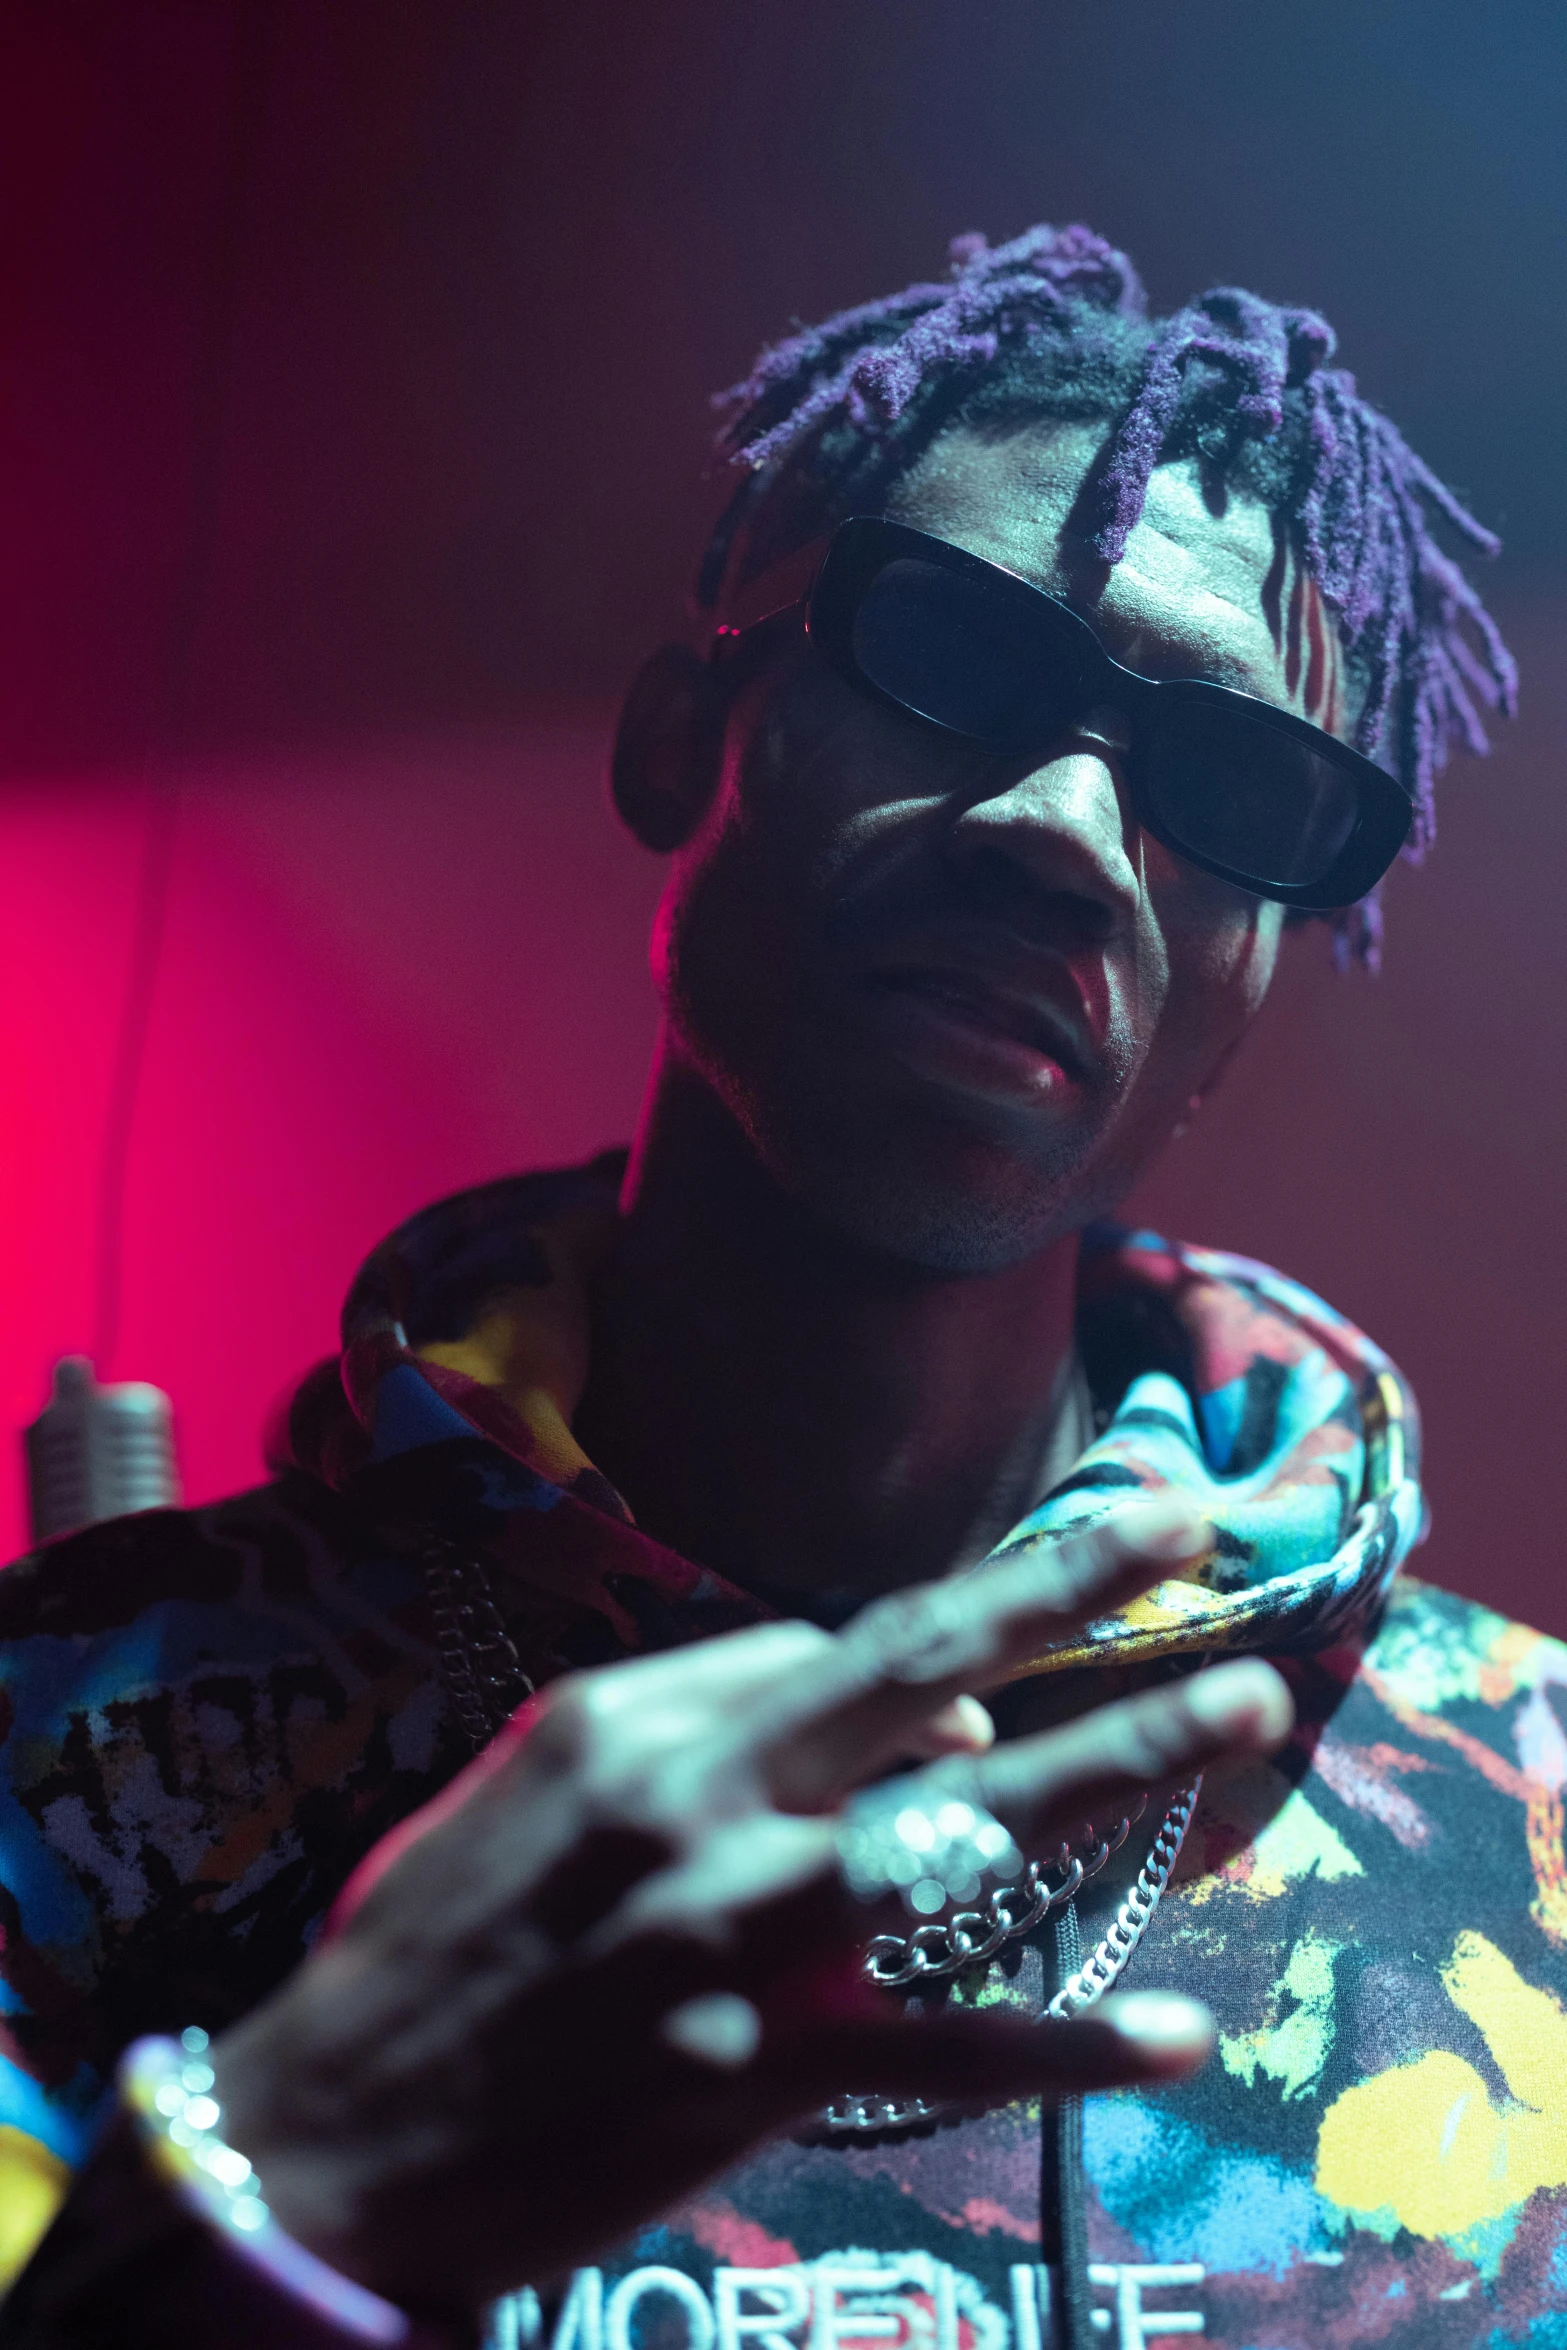 a man in a colorful jacket and sunglasses, an album cover, trending on pexels, 2 1 savage, dramatic lighting; 4k 8k, ( ( theatrical ) ), performing a music video